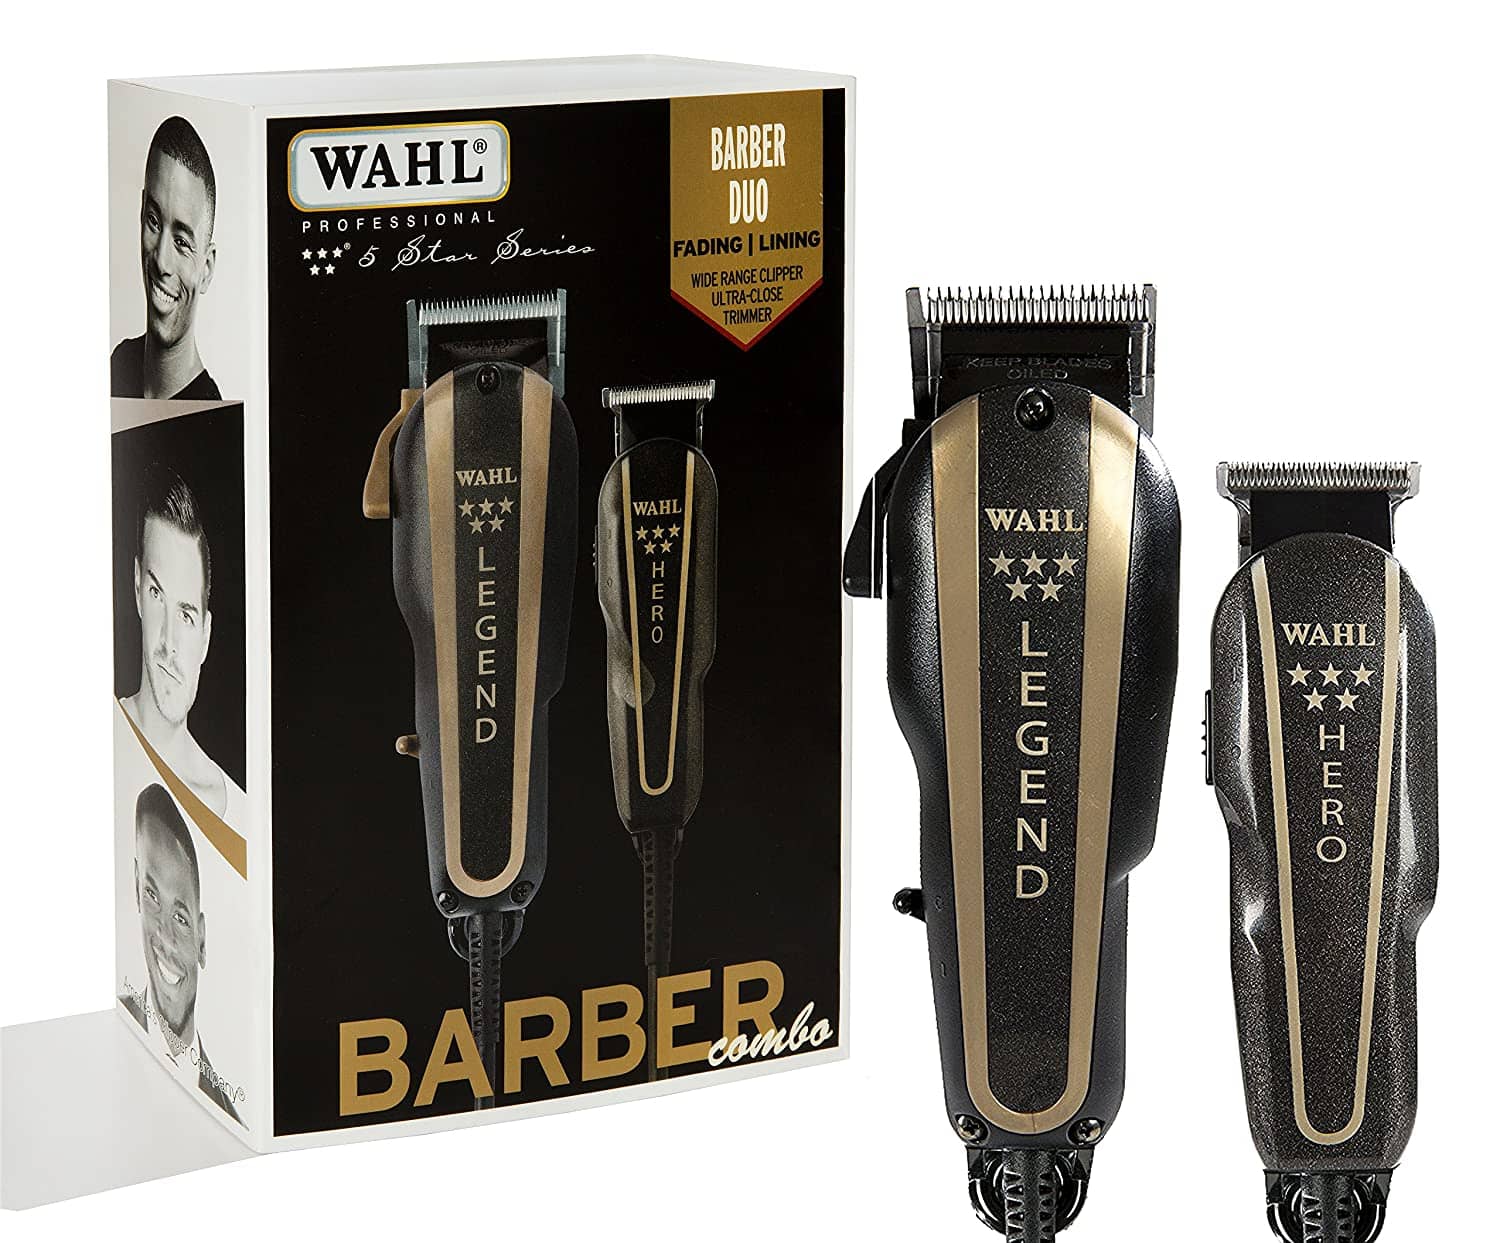 WAHL Professional 5-Star Barber Combo #880 for independent barbers